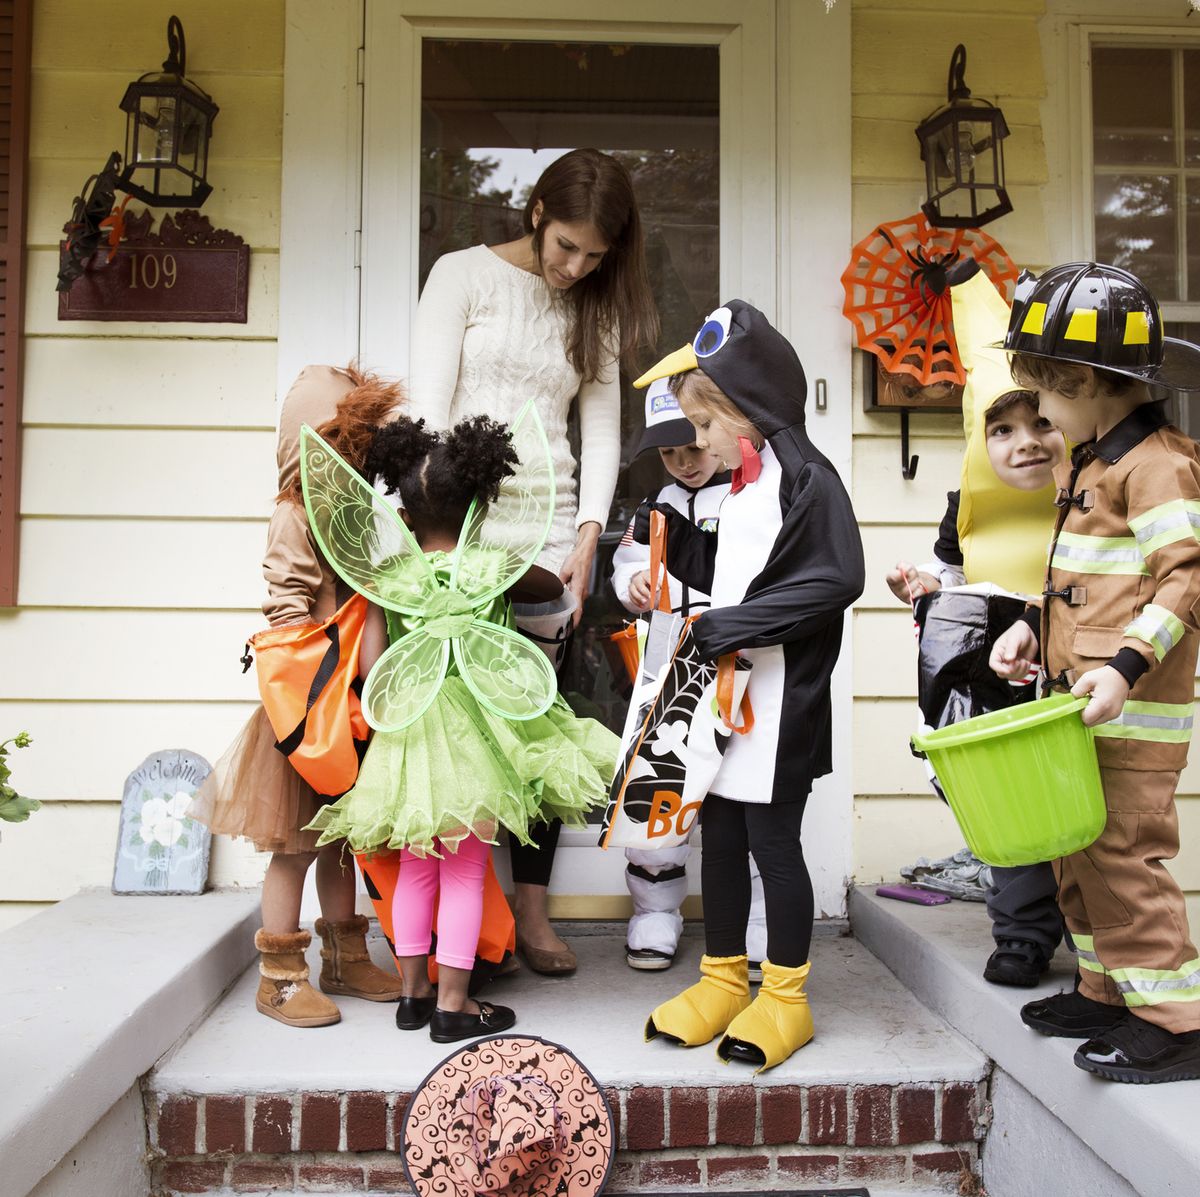 What Is Halloween? Origins, Meaning, and Traditions